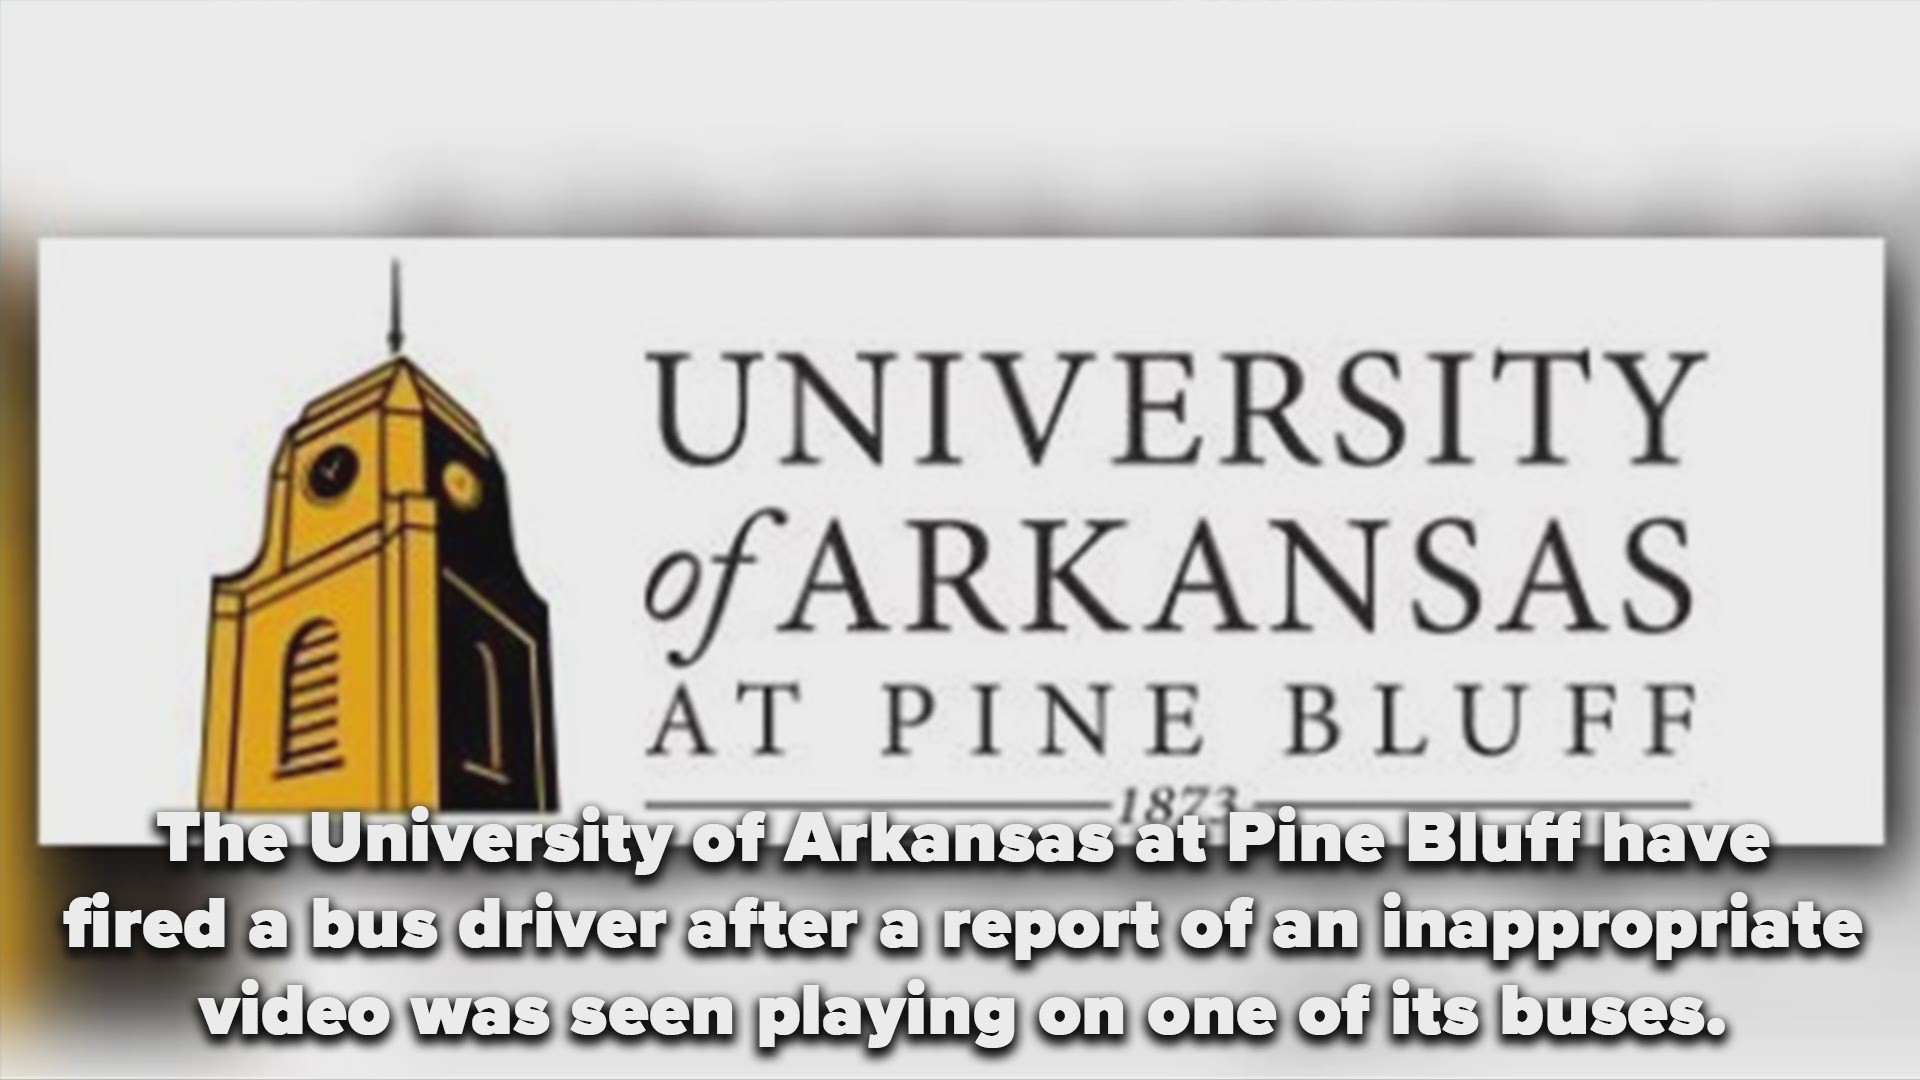 UAPB fires bus driver after investigating report of inappropriate video